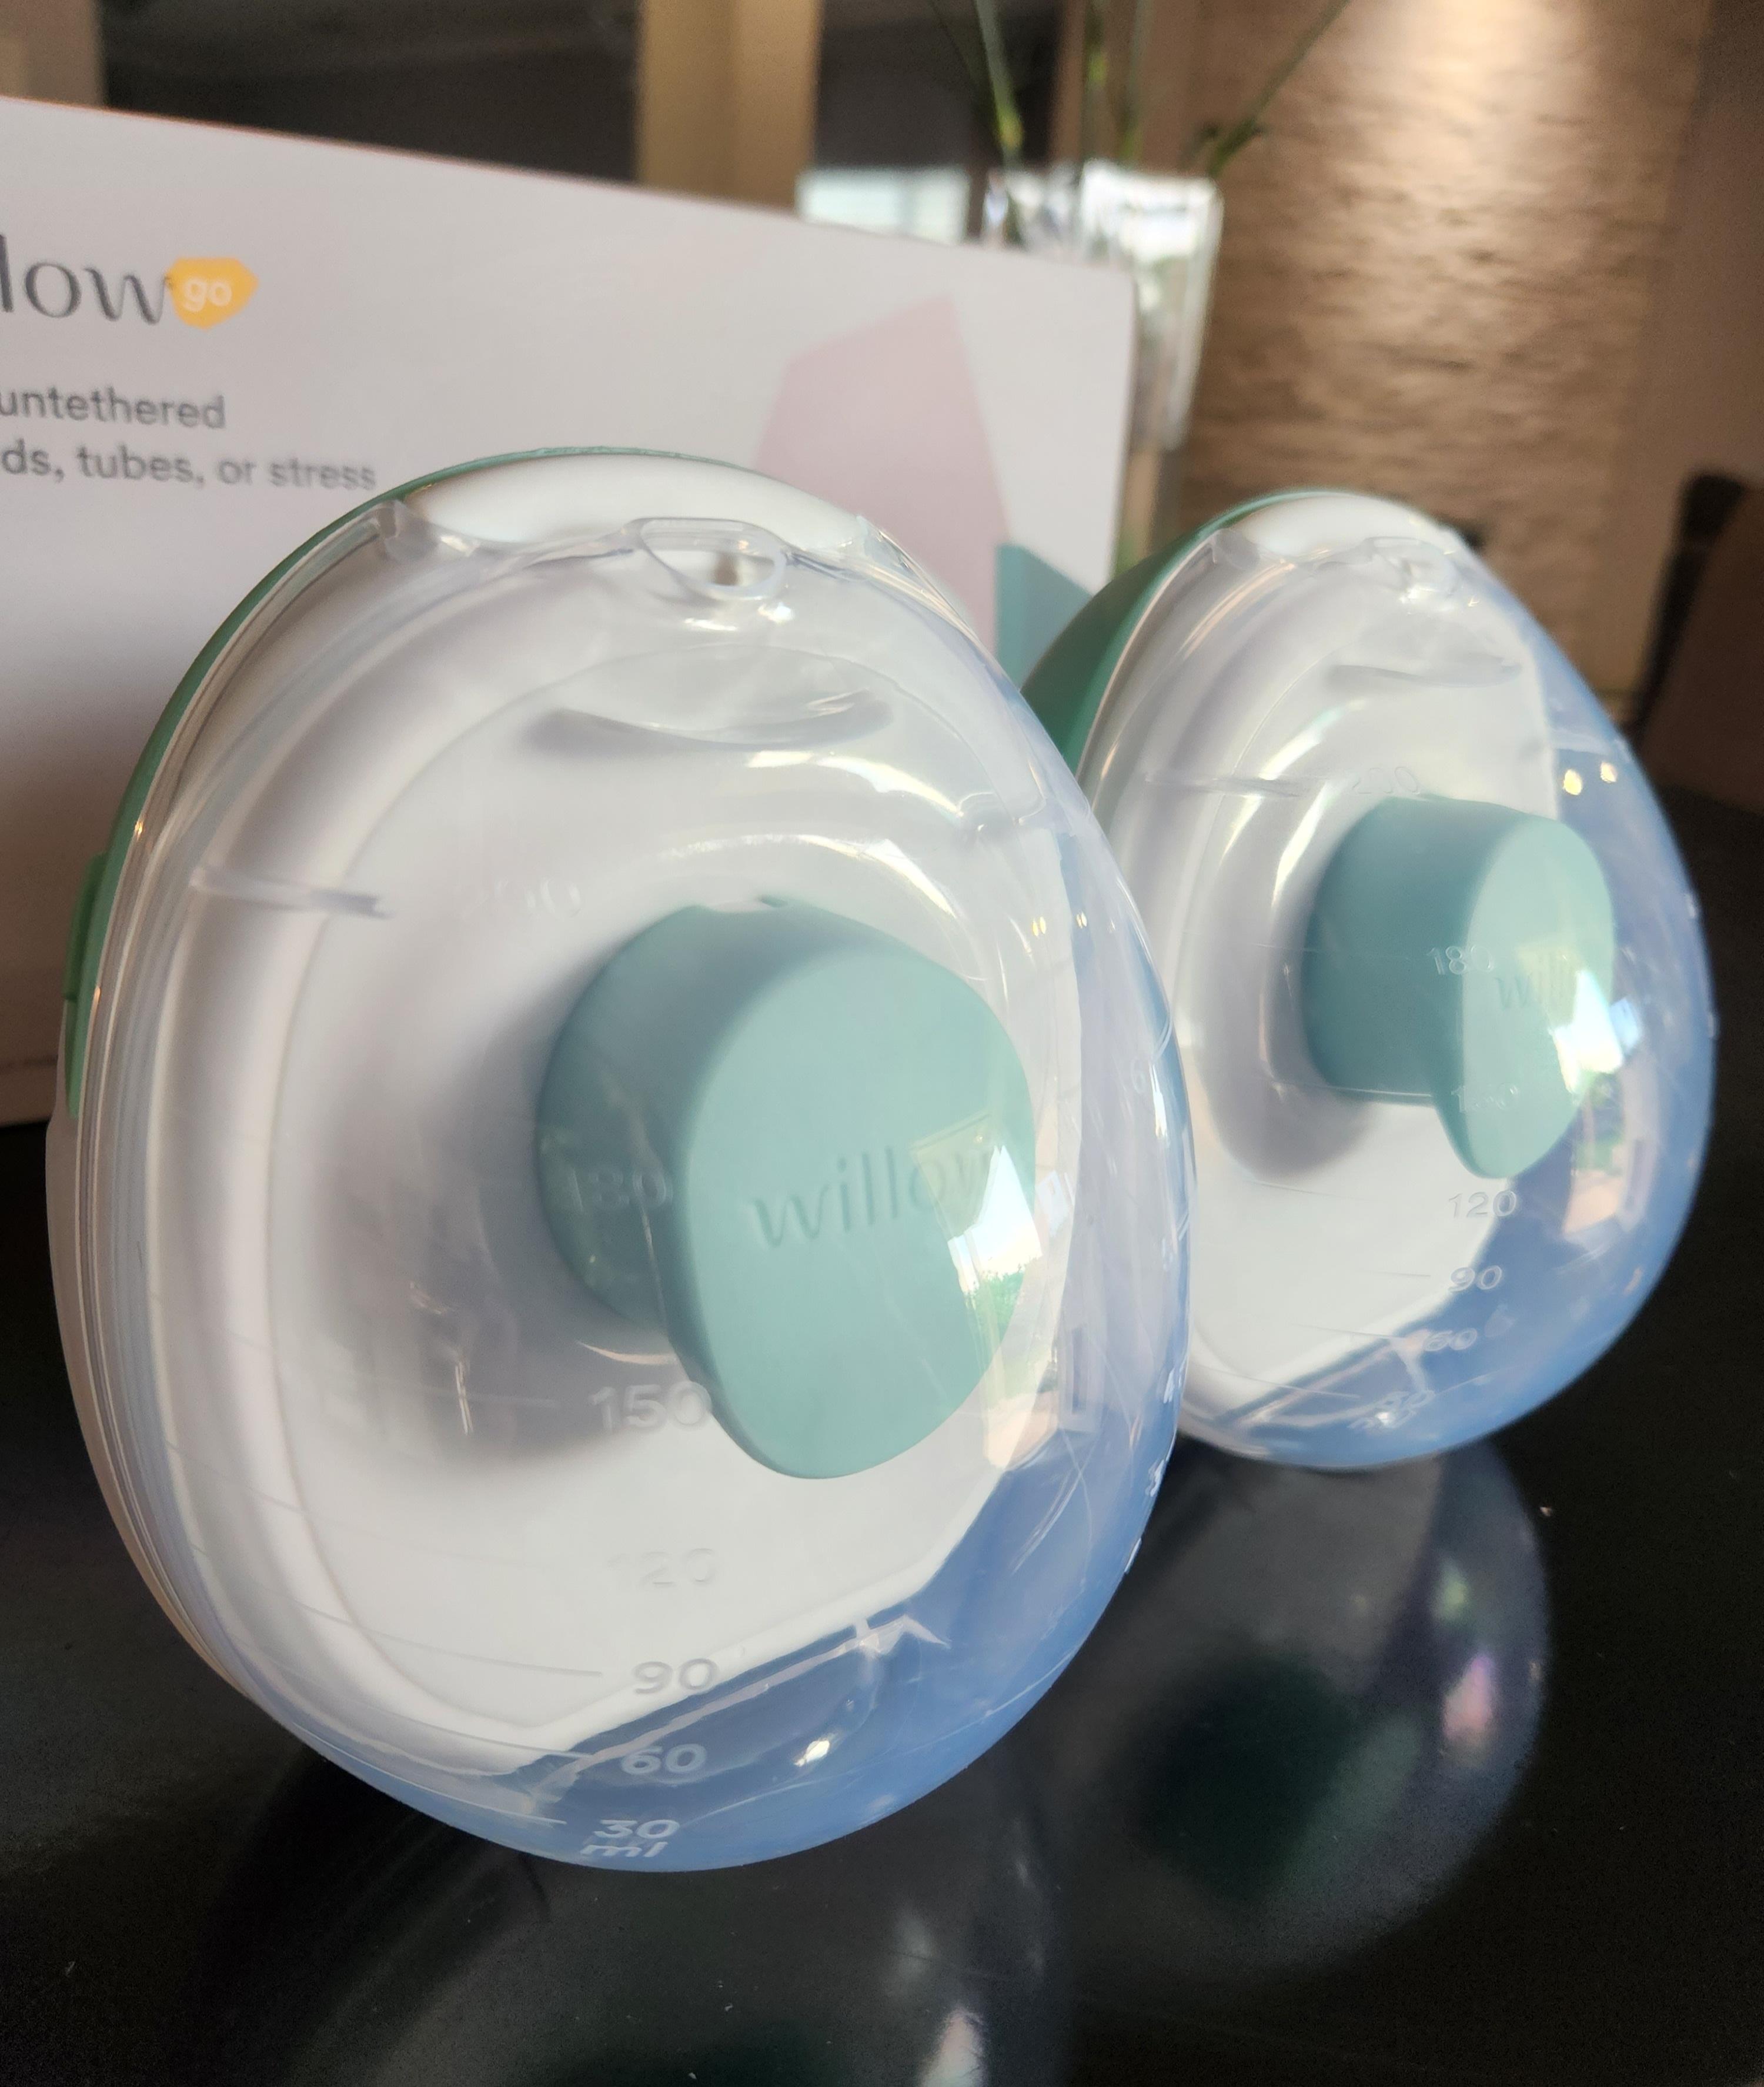 Willow 3.0 versus Willow Go: which breast pump is best for me